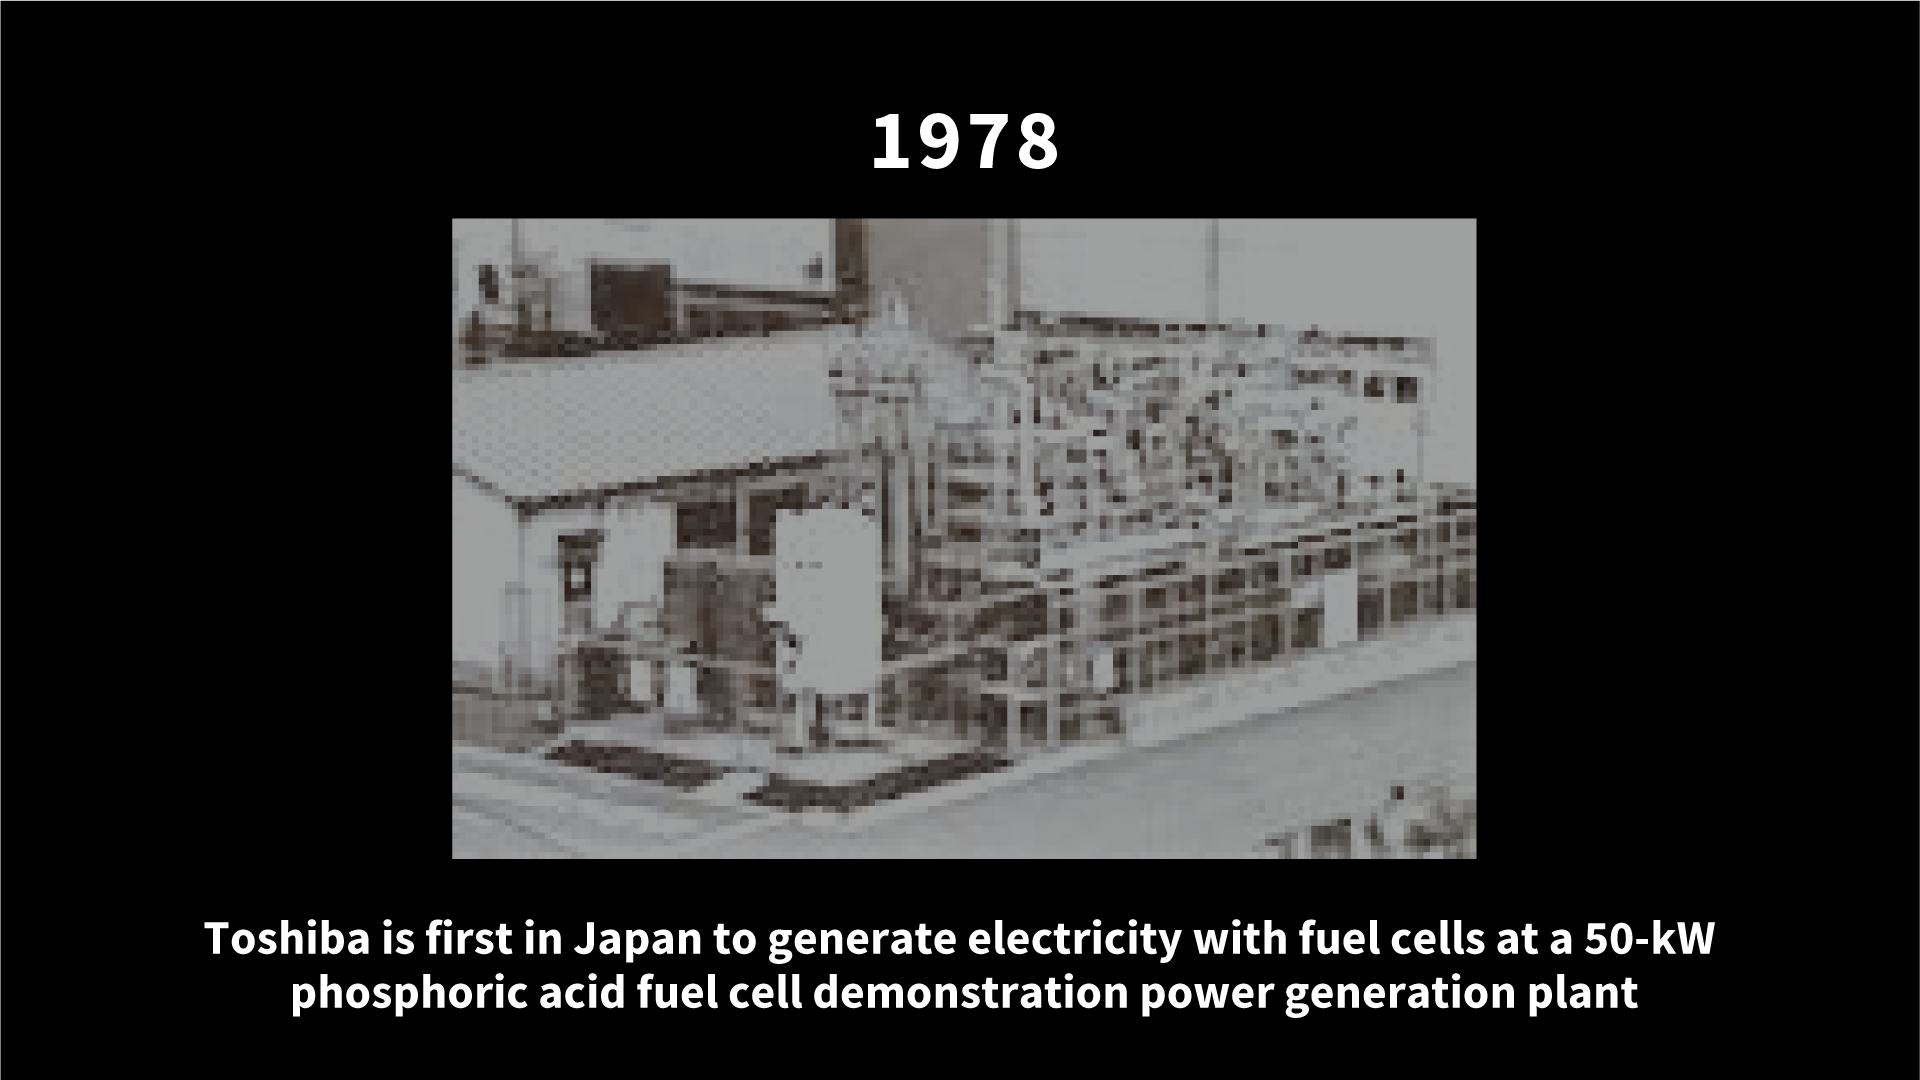 1978 Toshiba is first in Japan to generate electricity with fuel cells at a 50-kW phosphoric acid fuel cell demonstration power generation plant